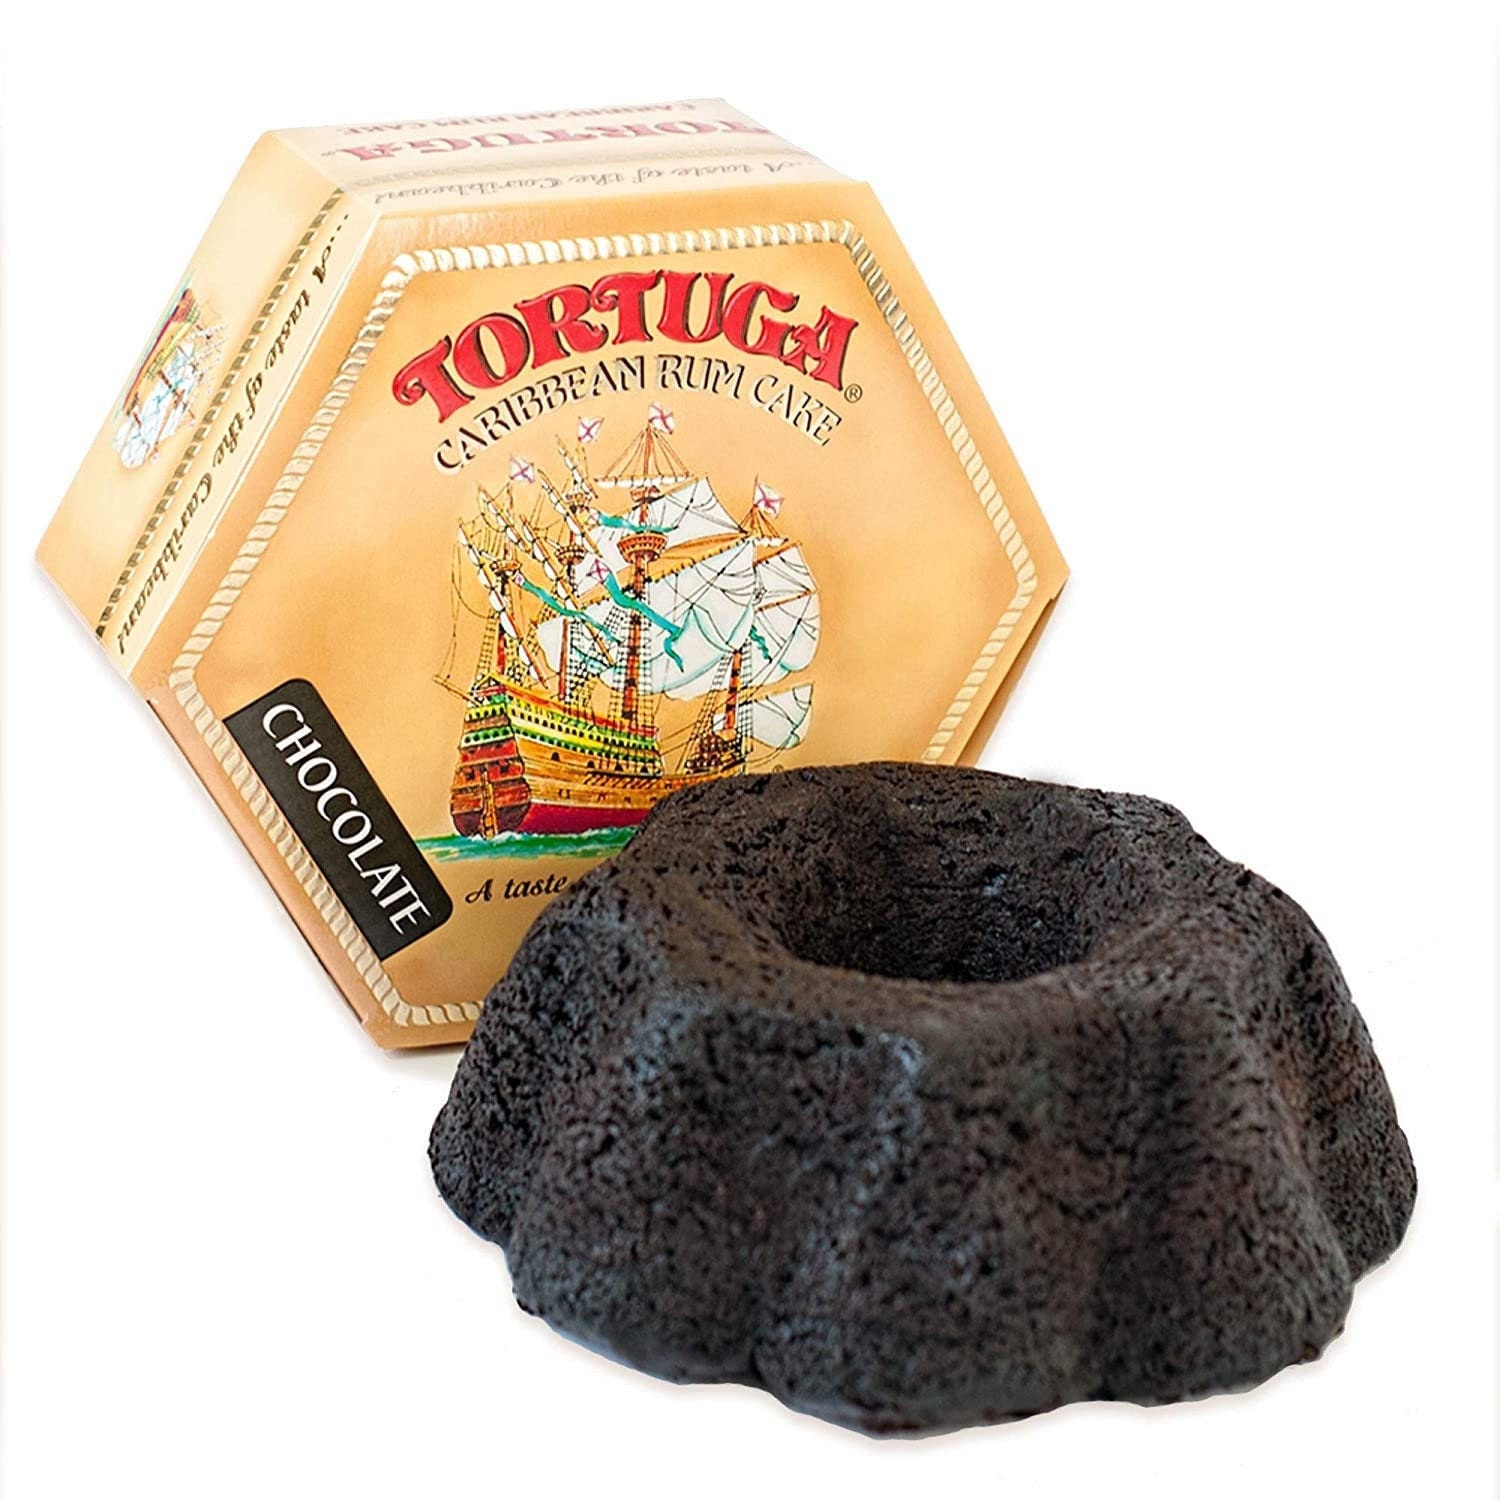 Amazon.com: TORTUGA Caribbean Original Rum Cake with Walnuts - 16 oz Rum  Cake - The Perfect Premium Gourmet Gift for Gift Baskets, Parties,  Holidays, and Birthdays - Great Cakes for Delivery :